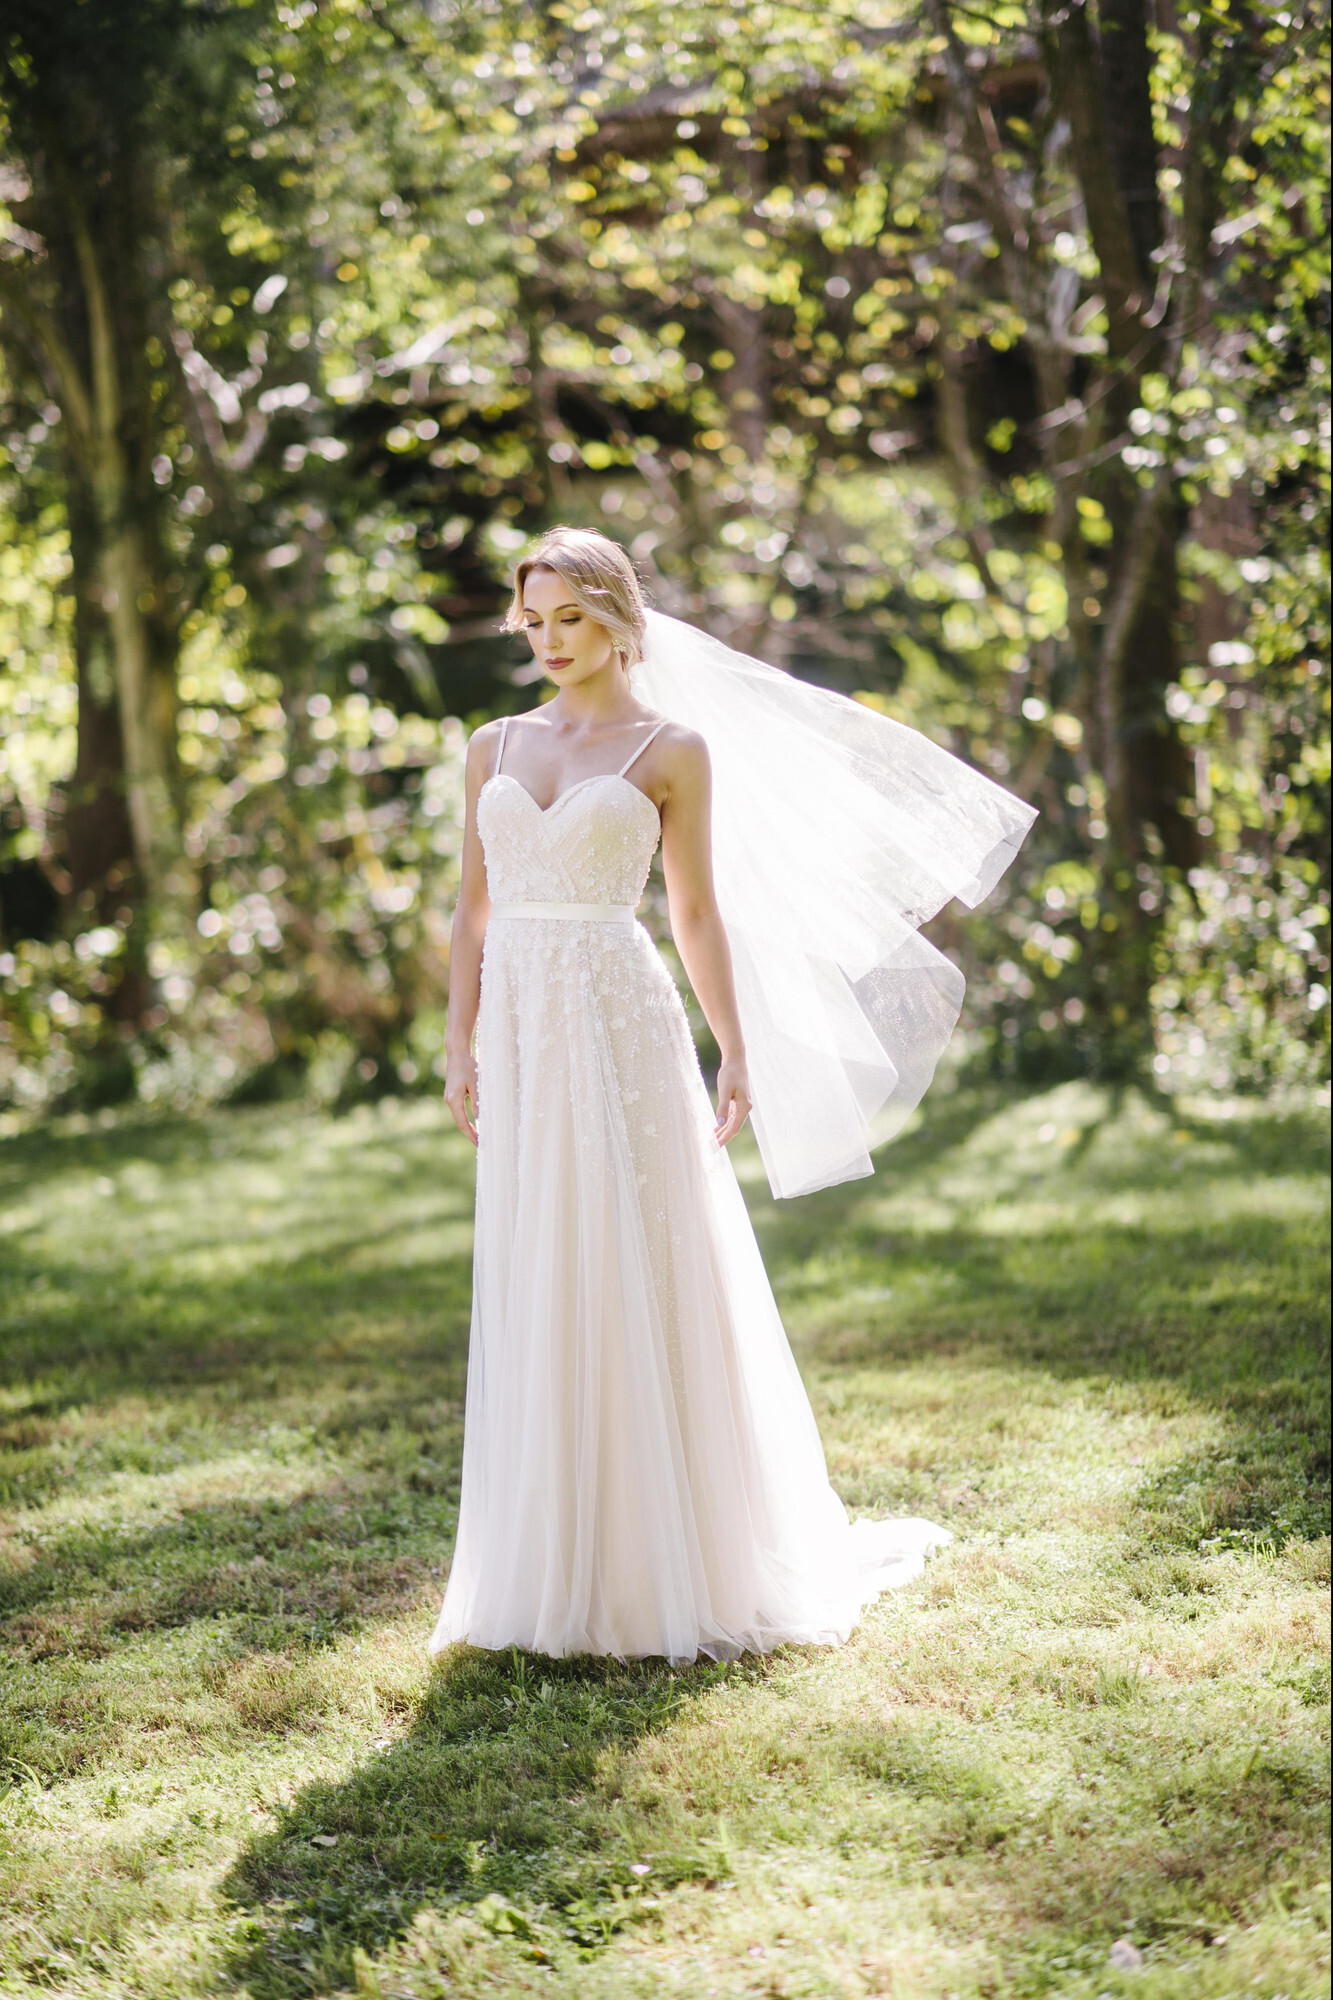 Bron Wedding Dress from French Collection by Wendy Makin - hitched.co.uk